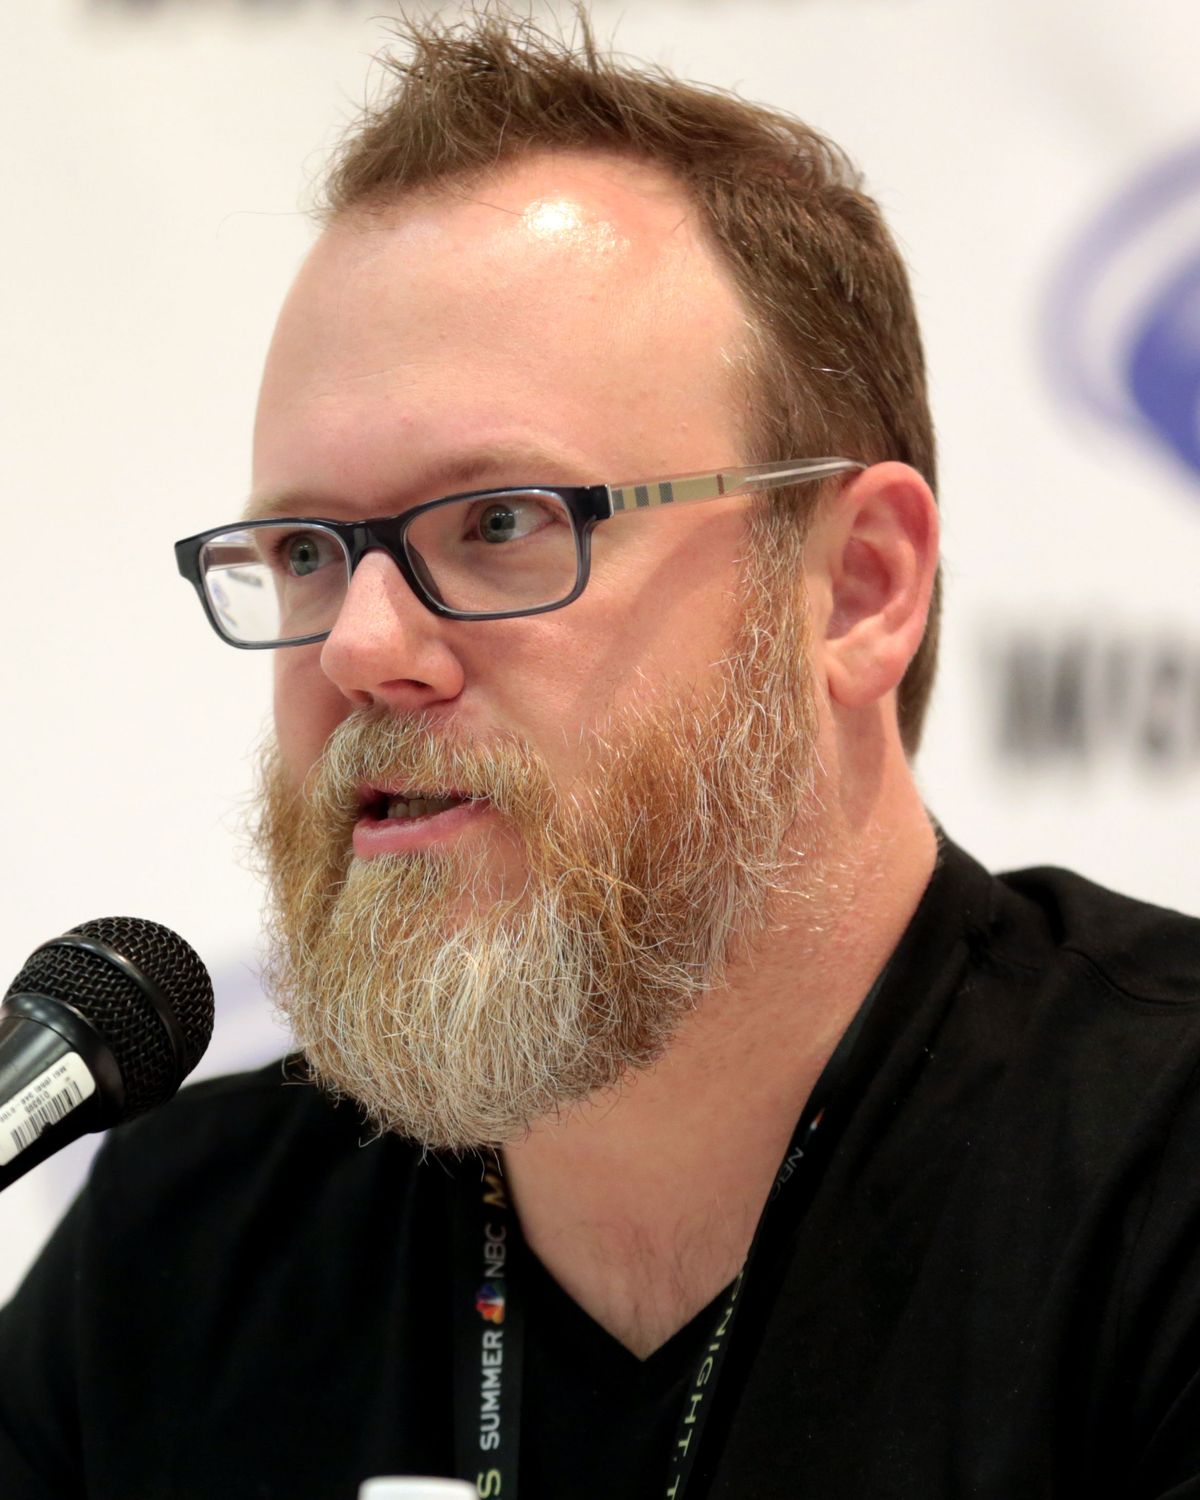 Why Did Marvel Fire Star Wars Comics Writer Chuck Wendig